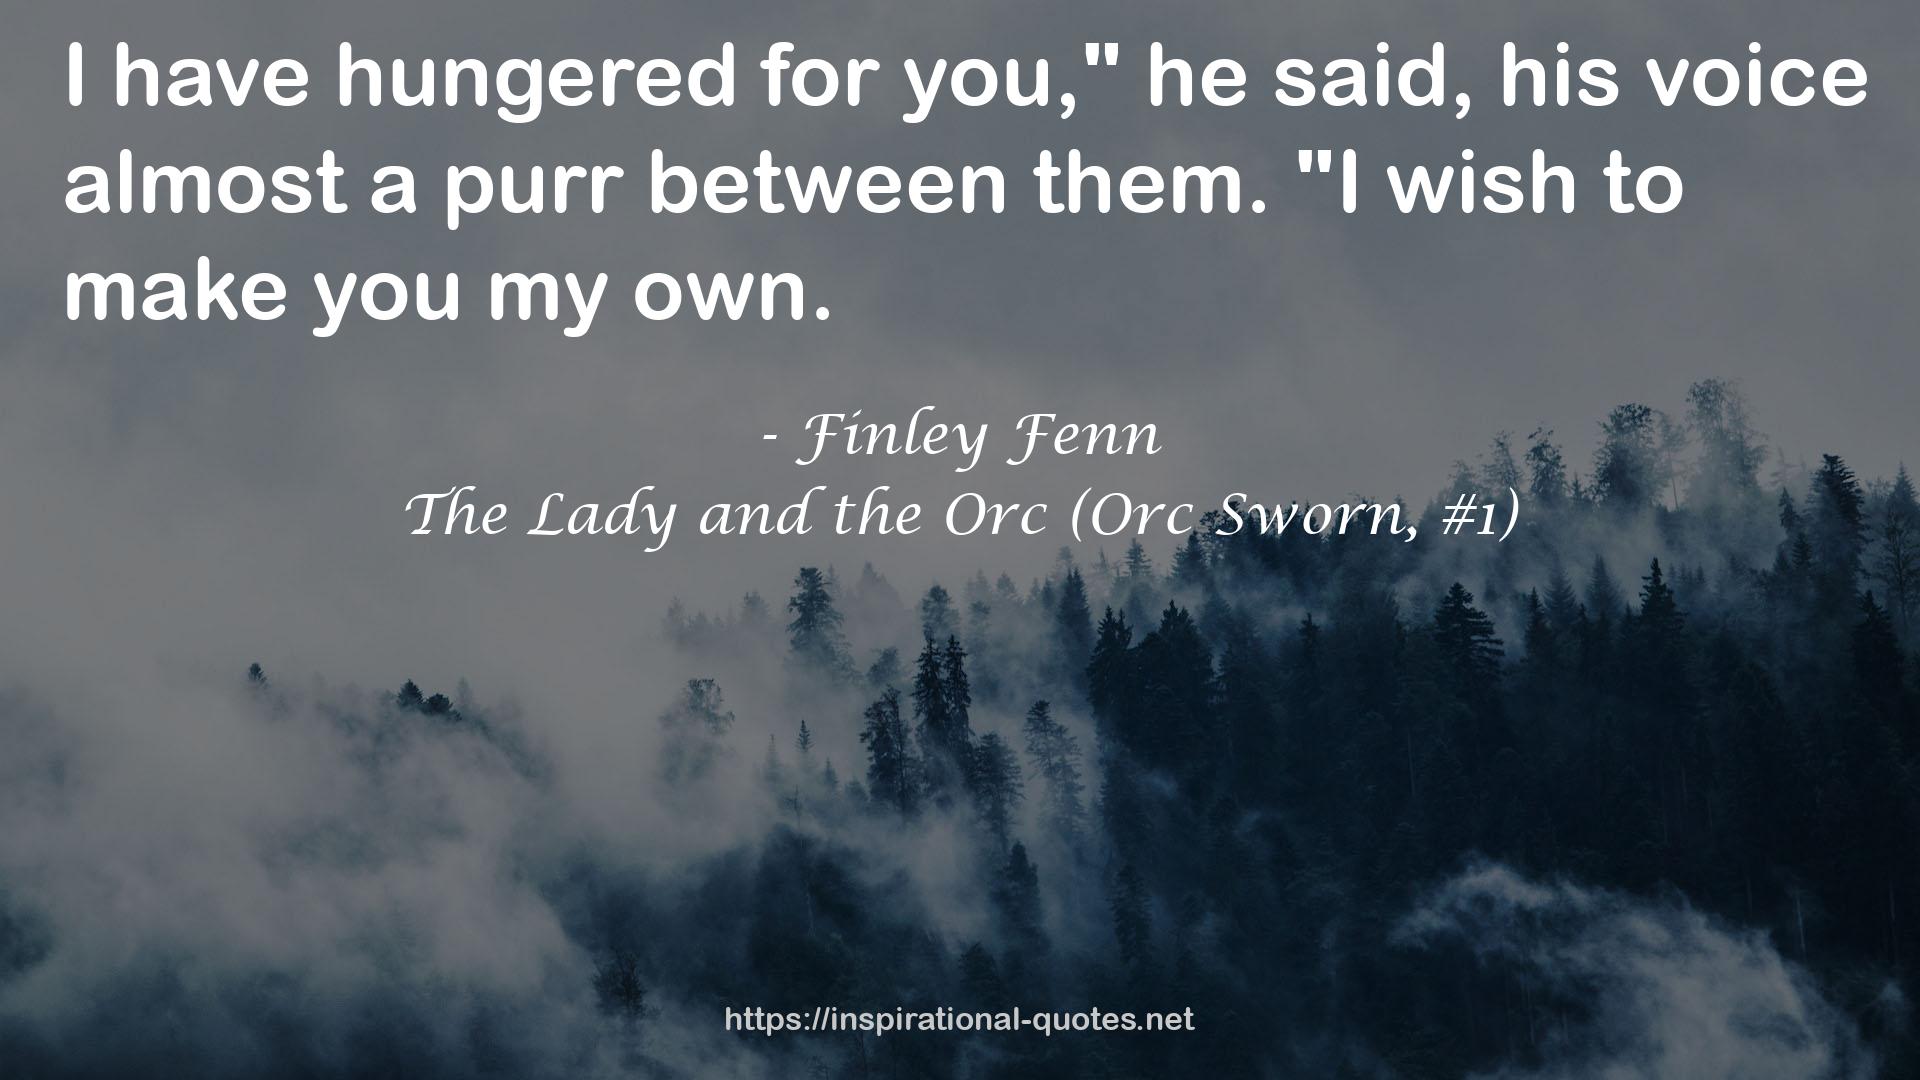 The Lady and the Orc (Orc Sworn, #1) QUOTES